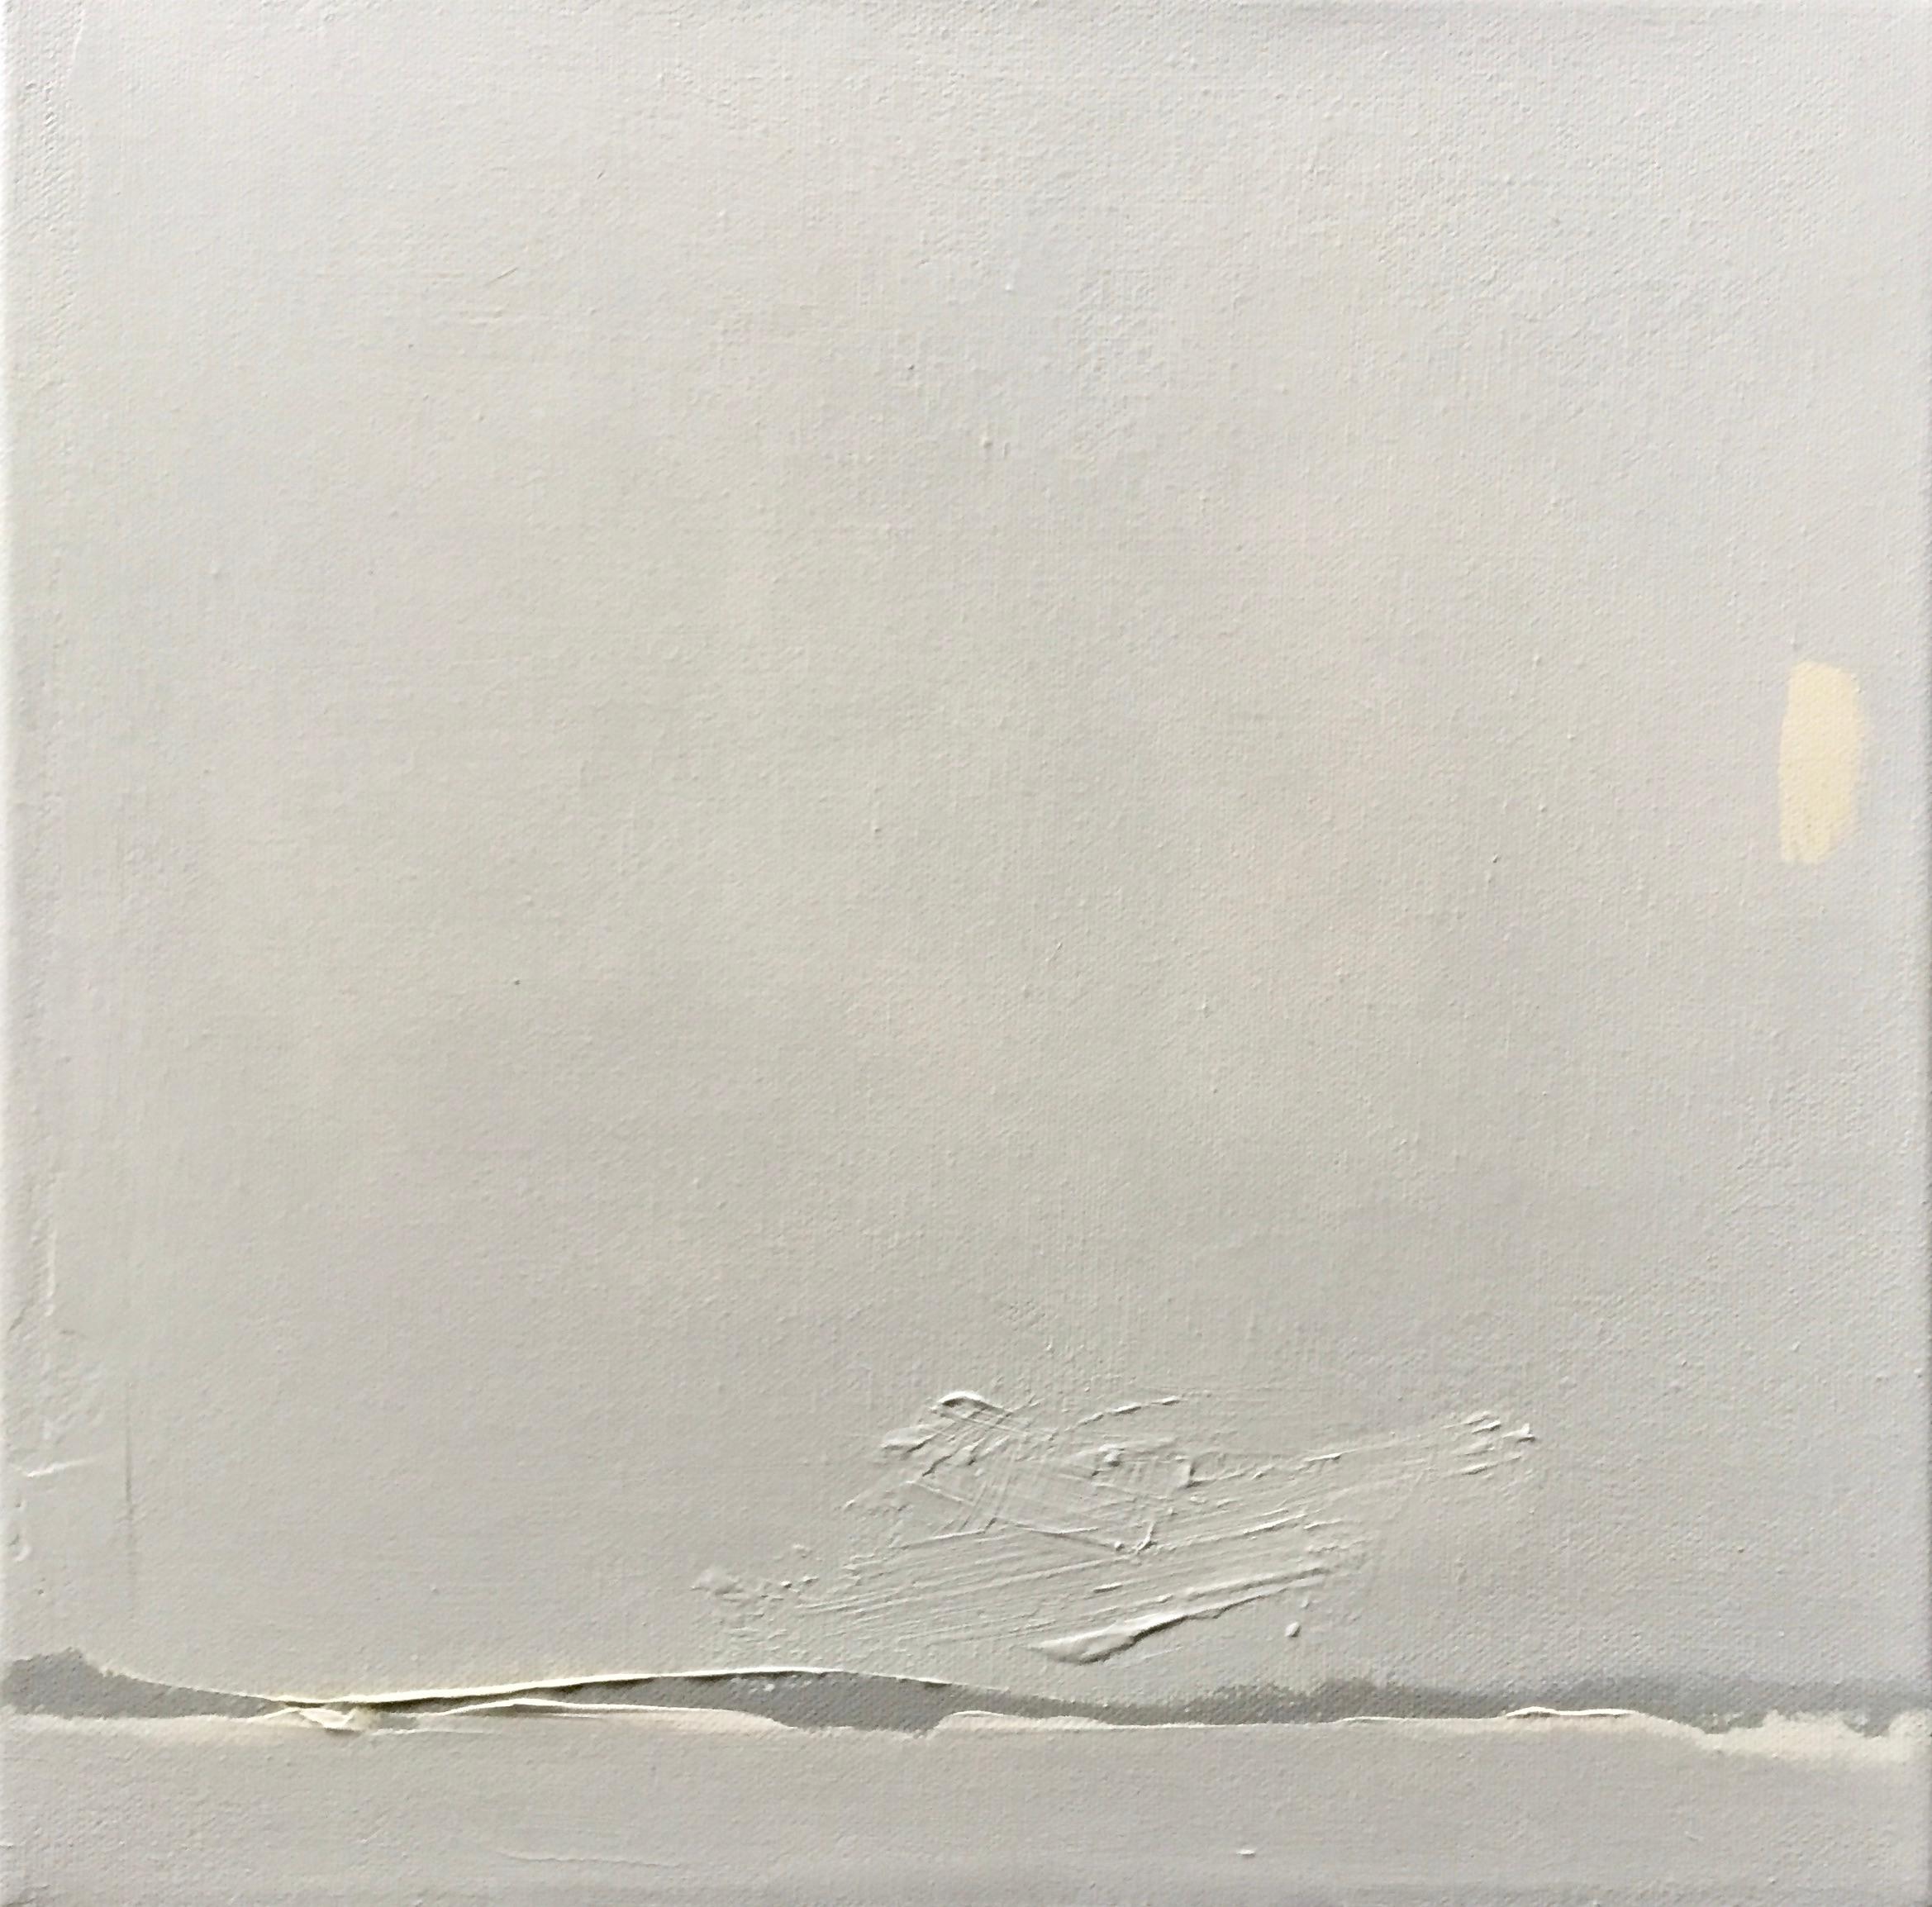 In this minimal abstract painting, emphasis is placed on simplifying the composition. Tone on tone paint textures create gentle movement and visual harmony. The restrained palette makes for a minimalist aesthetic with a calm vibe. 

To view more of